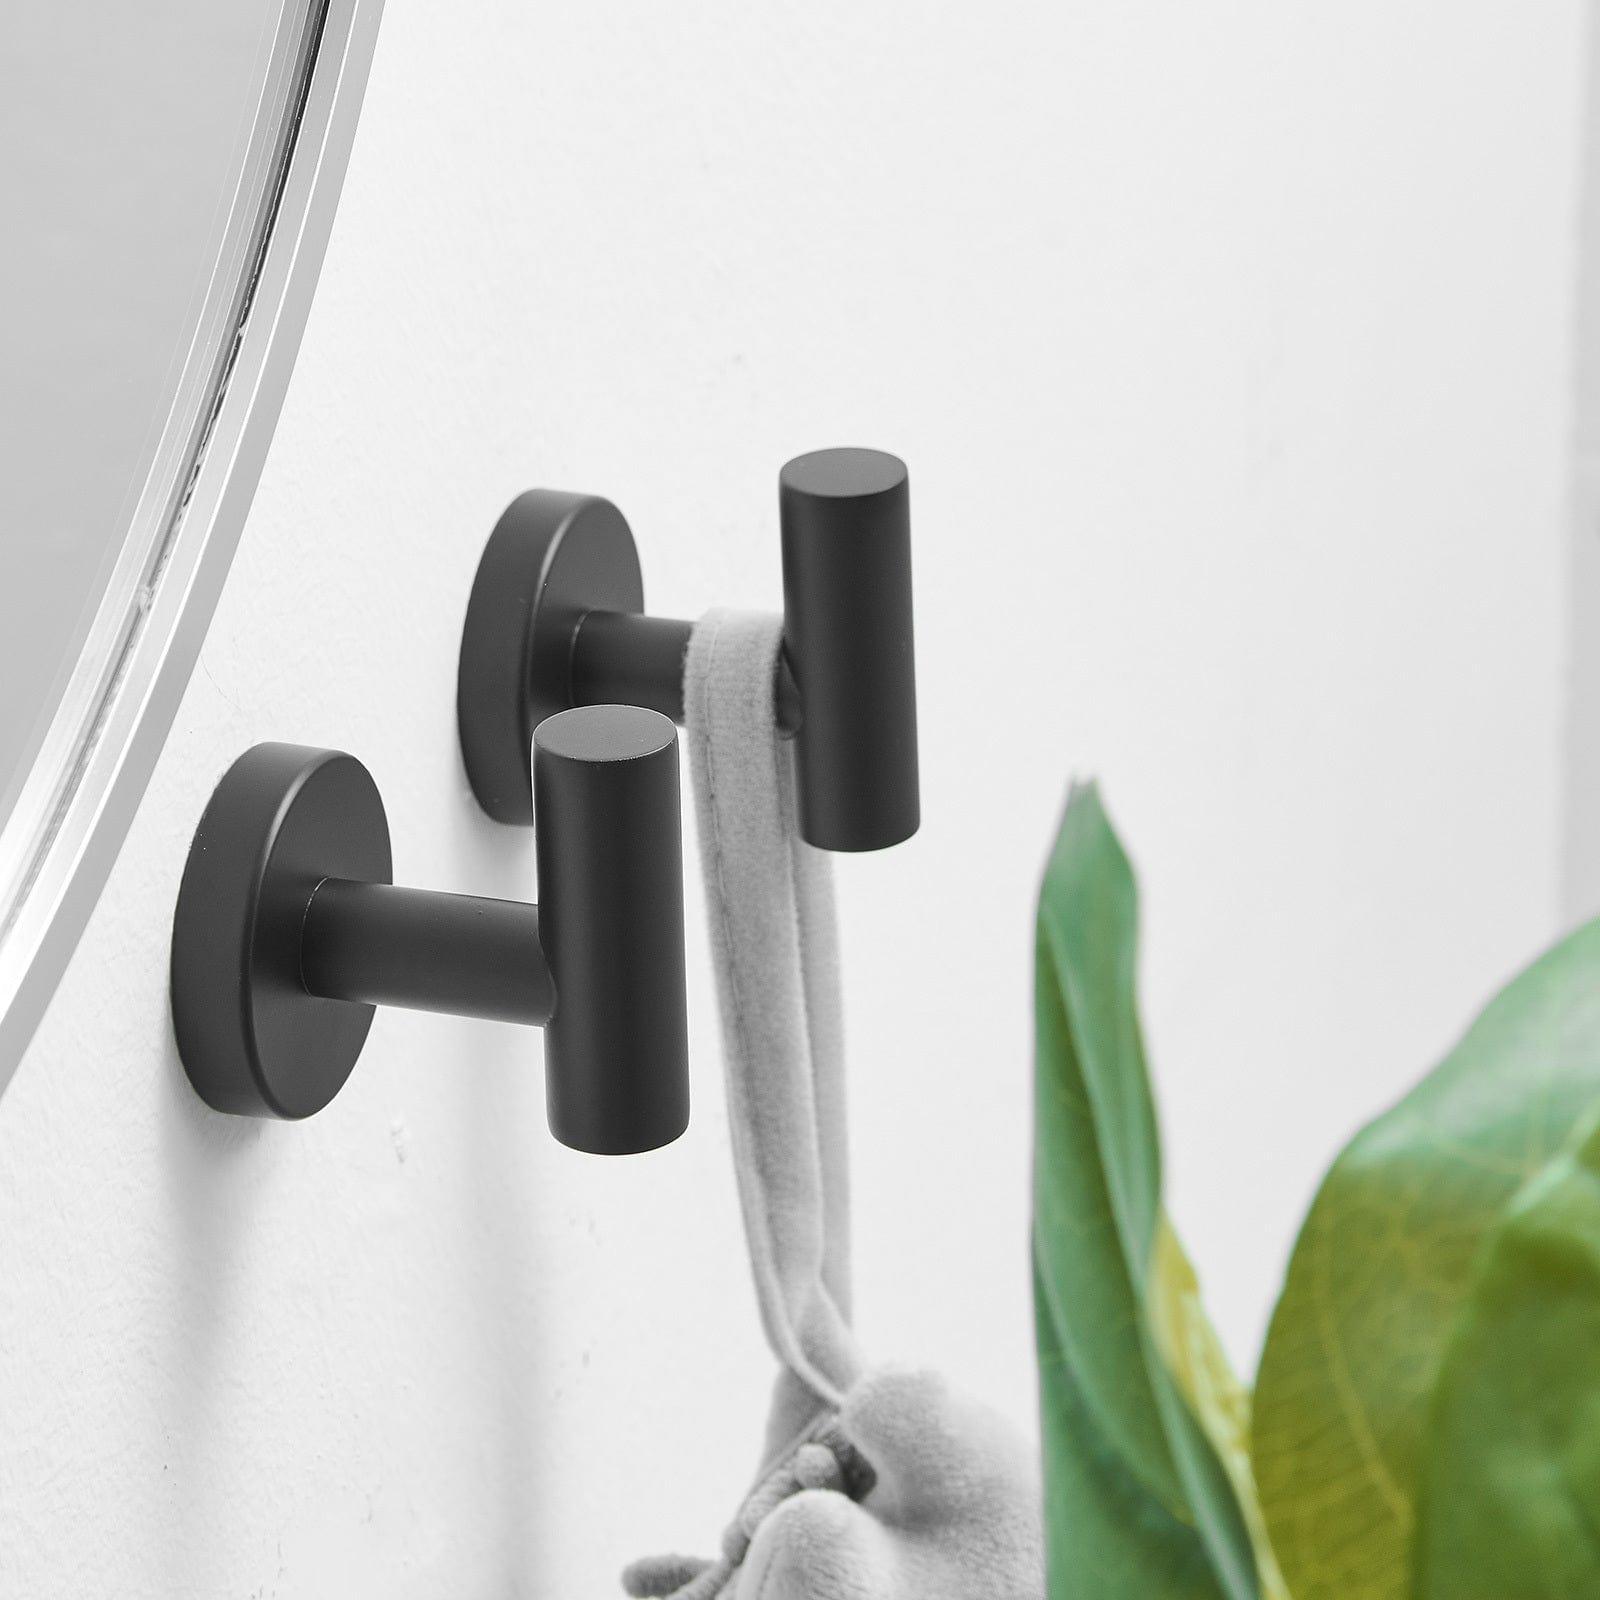 Shop Round Bathroom Robe Hook and Towel Hook in Stainless Steel Matte Black (2-Pack) Mademoiselle Home Decor